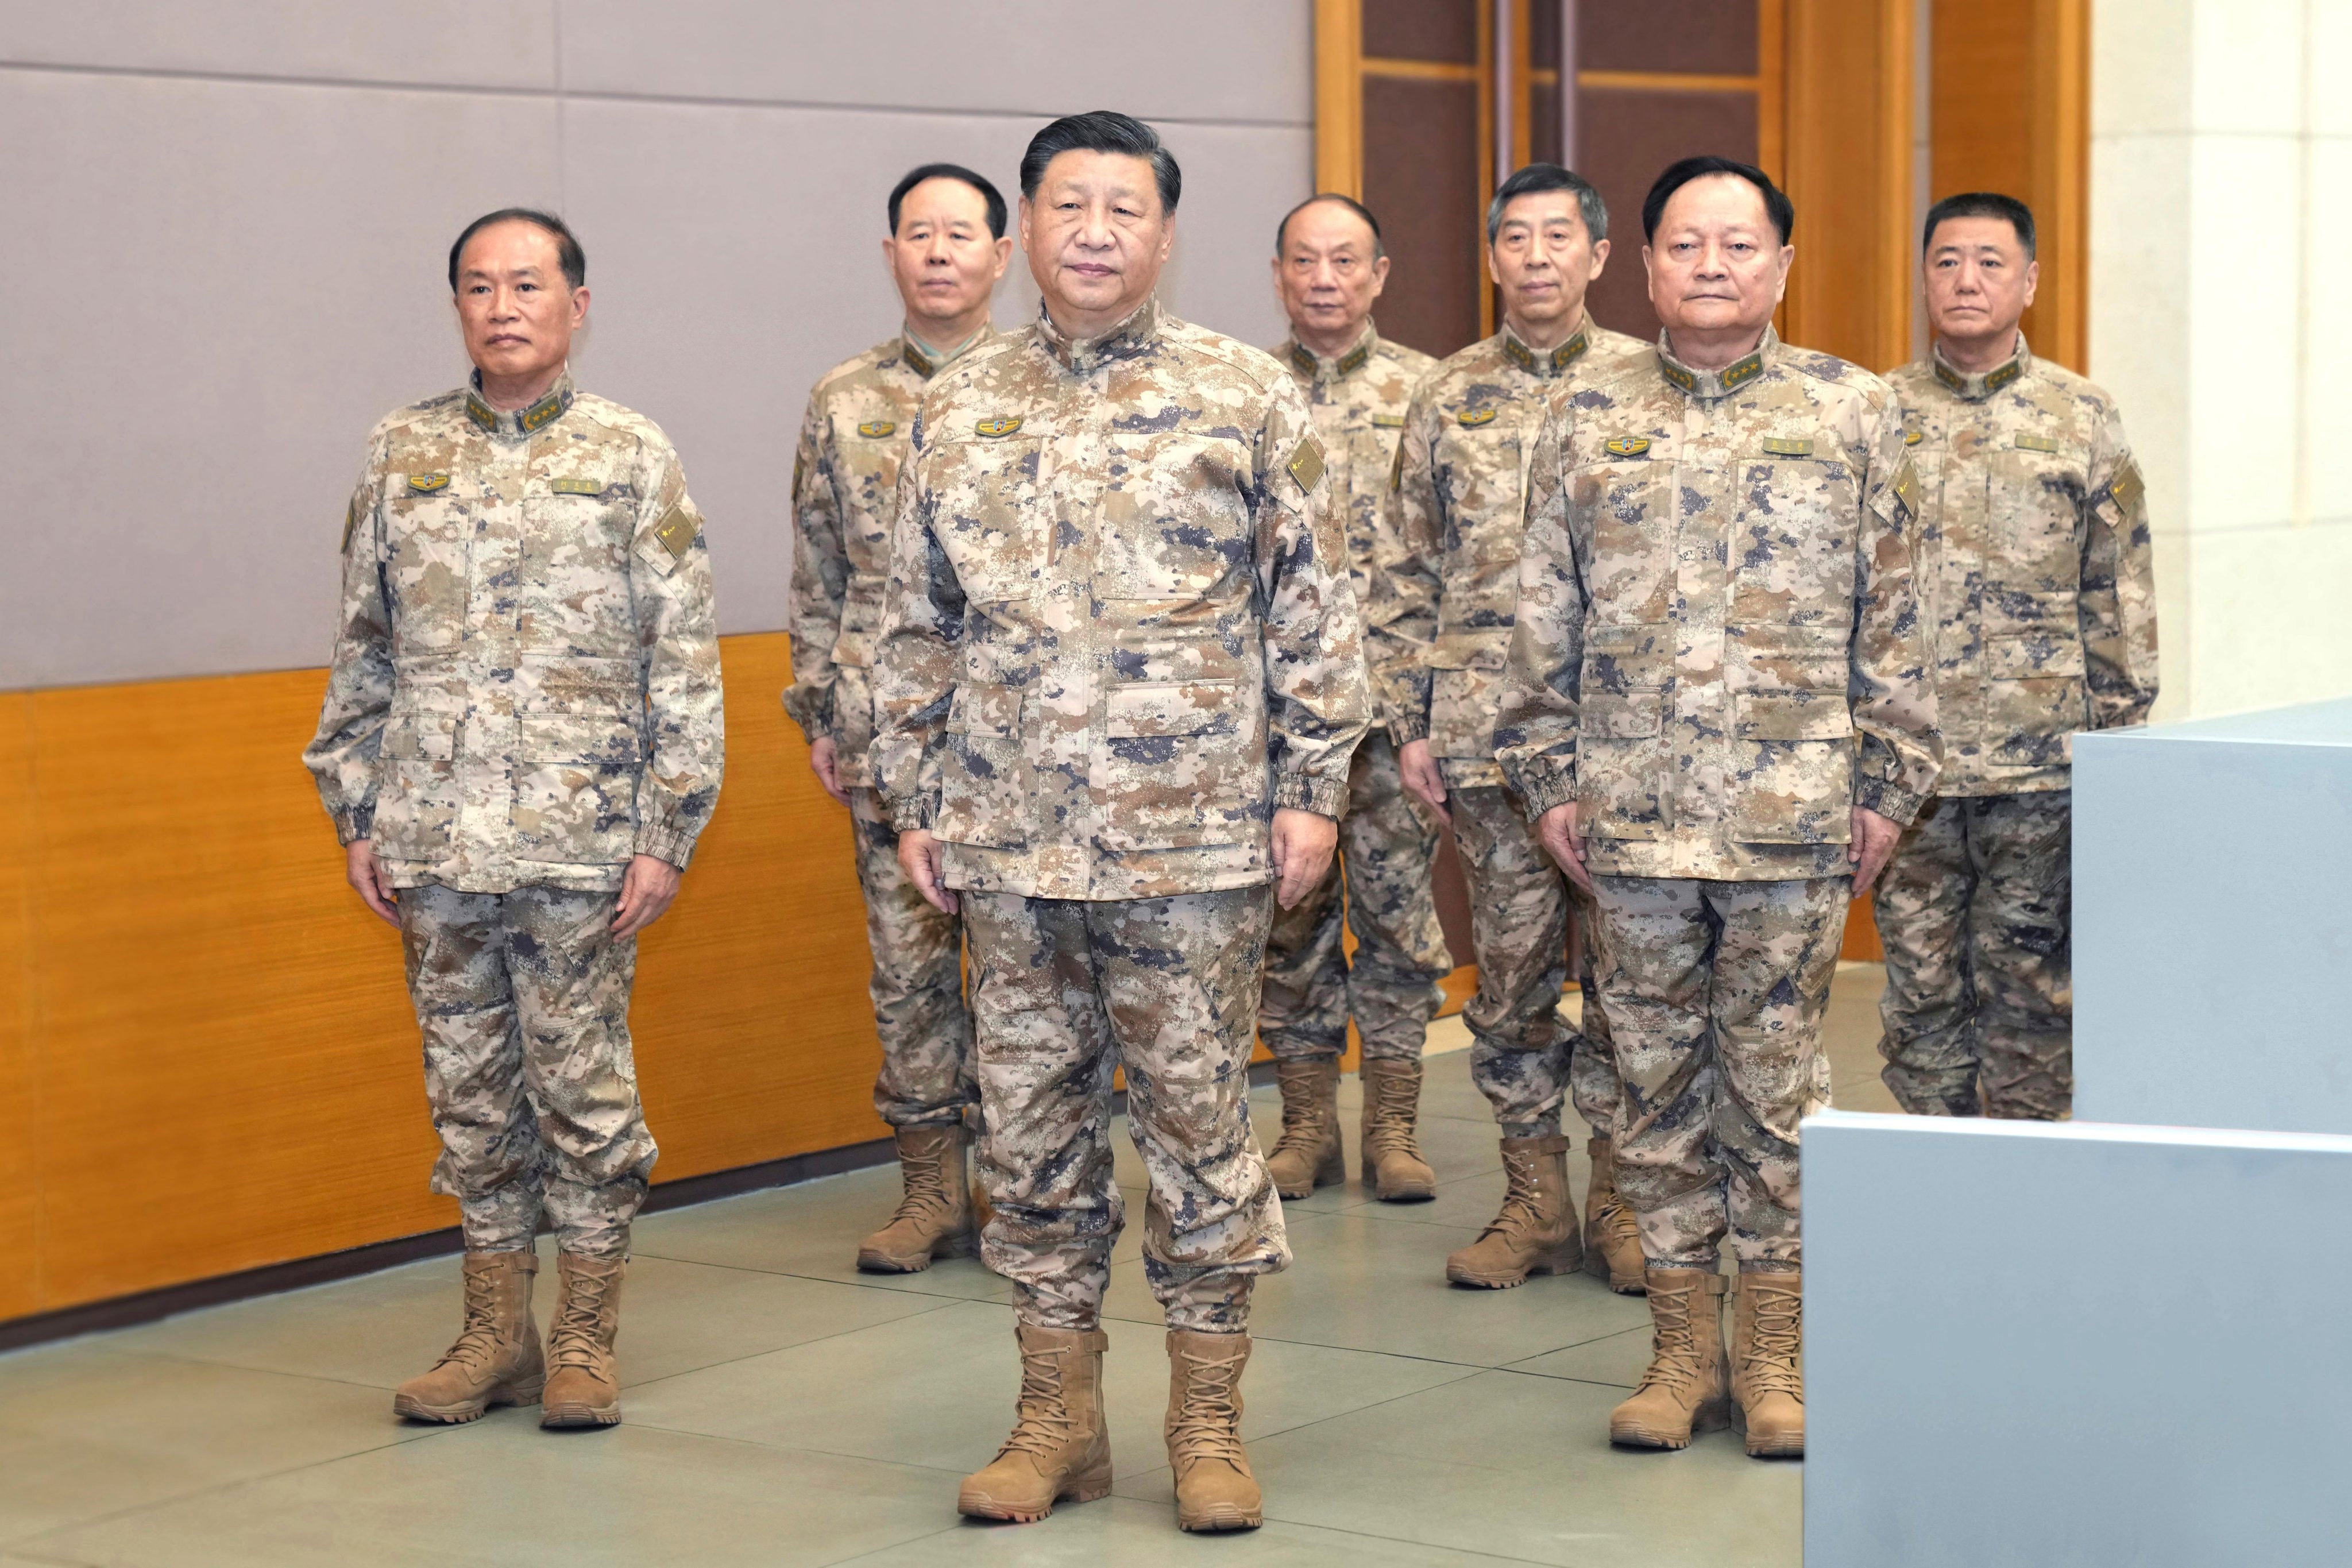 President Xi Jinping (front centre) stands with the members of the Central Military Commission, including vice-chairmen Zhang Youxia (front right) and He Weidong (front left), at the CMC joint operations command centre on November 8. Photo: Xinhua via AP